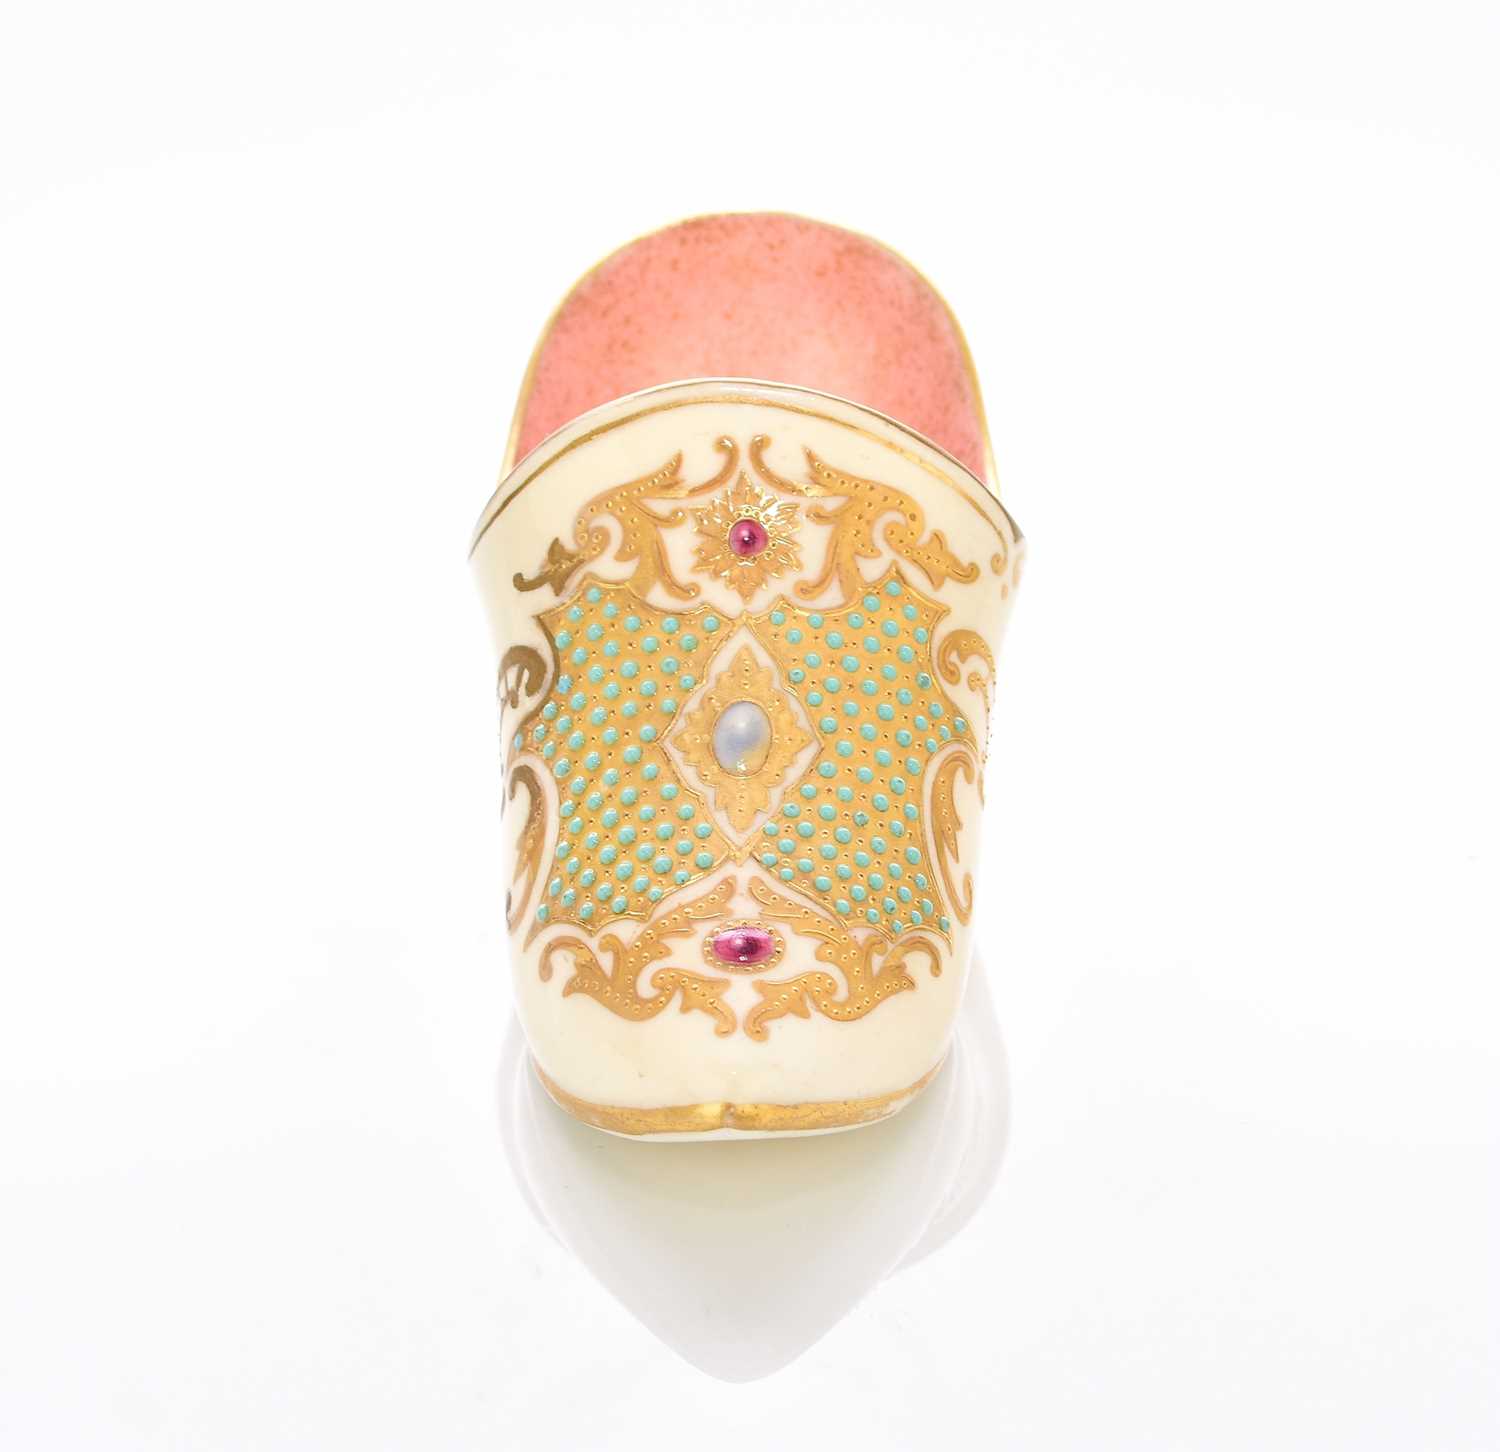 Coalport 'jewelled' slipper, late 19th/early 20th century - Image 3 of 6